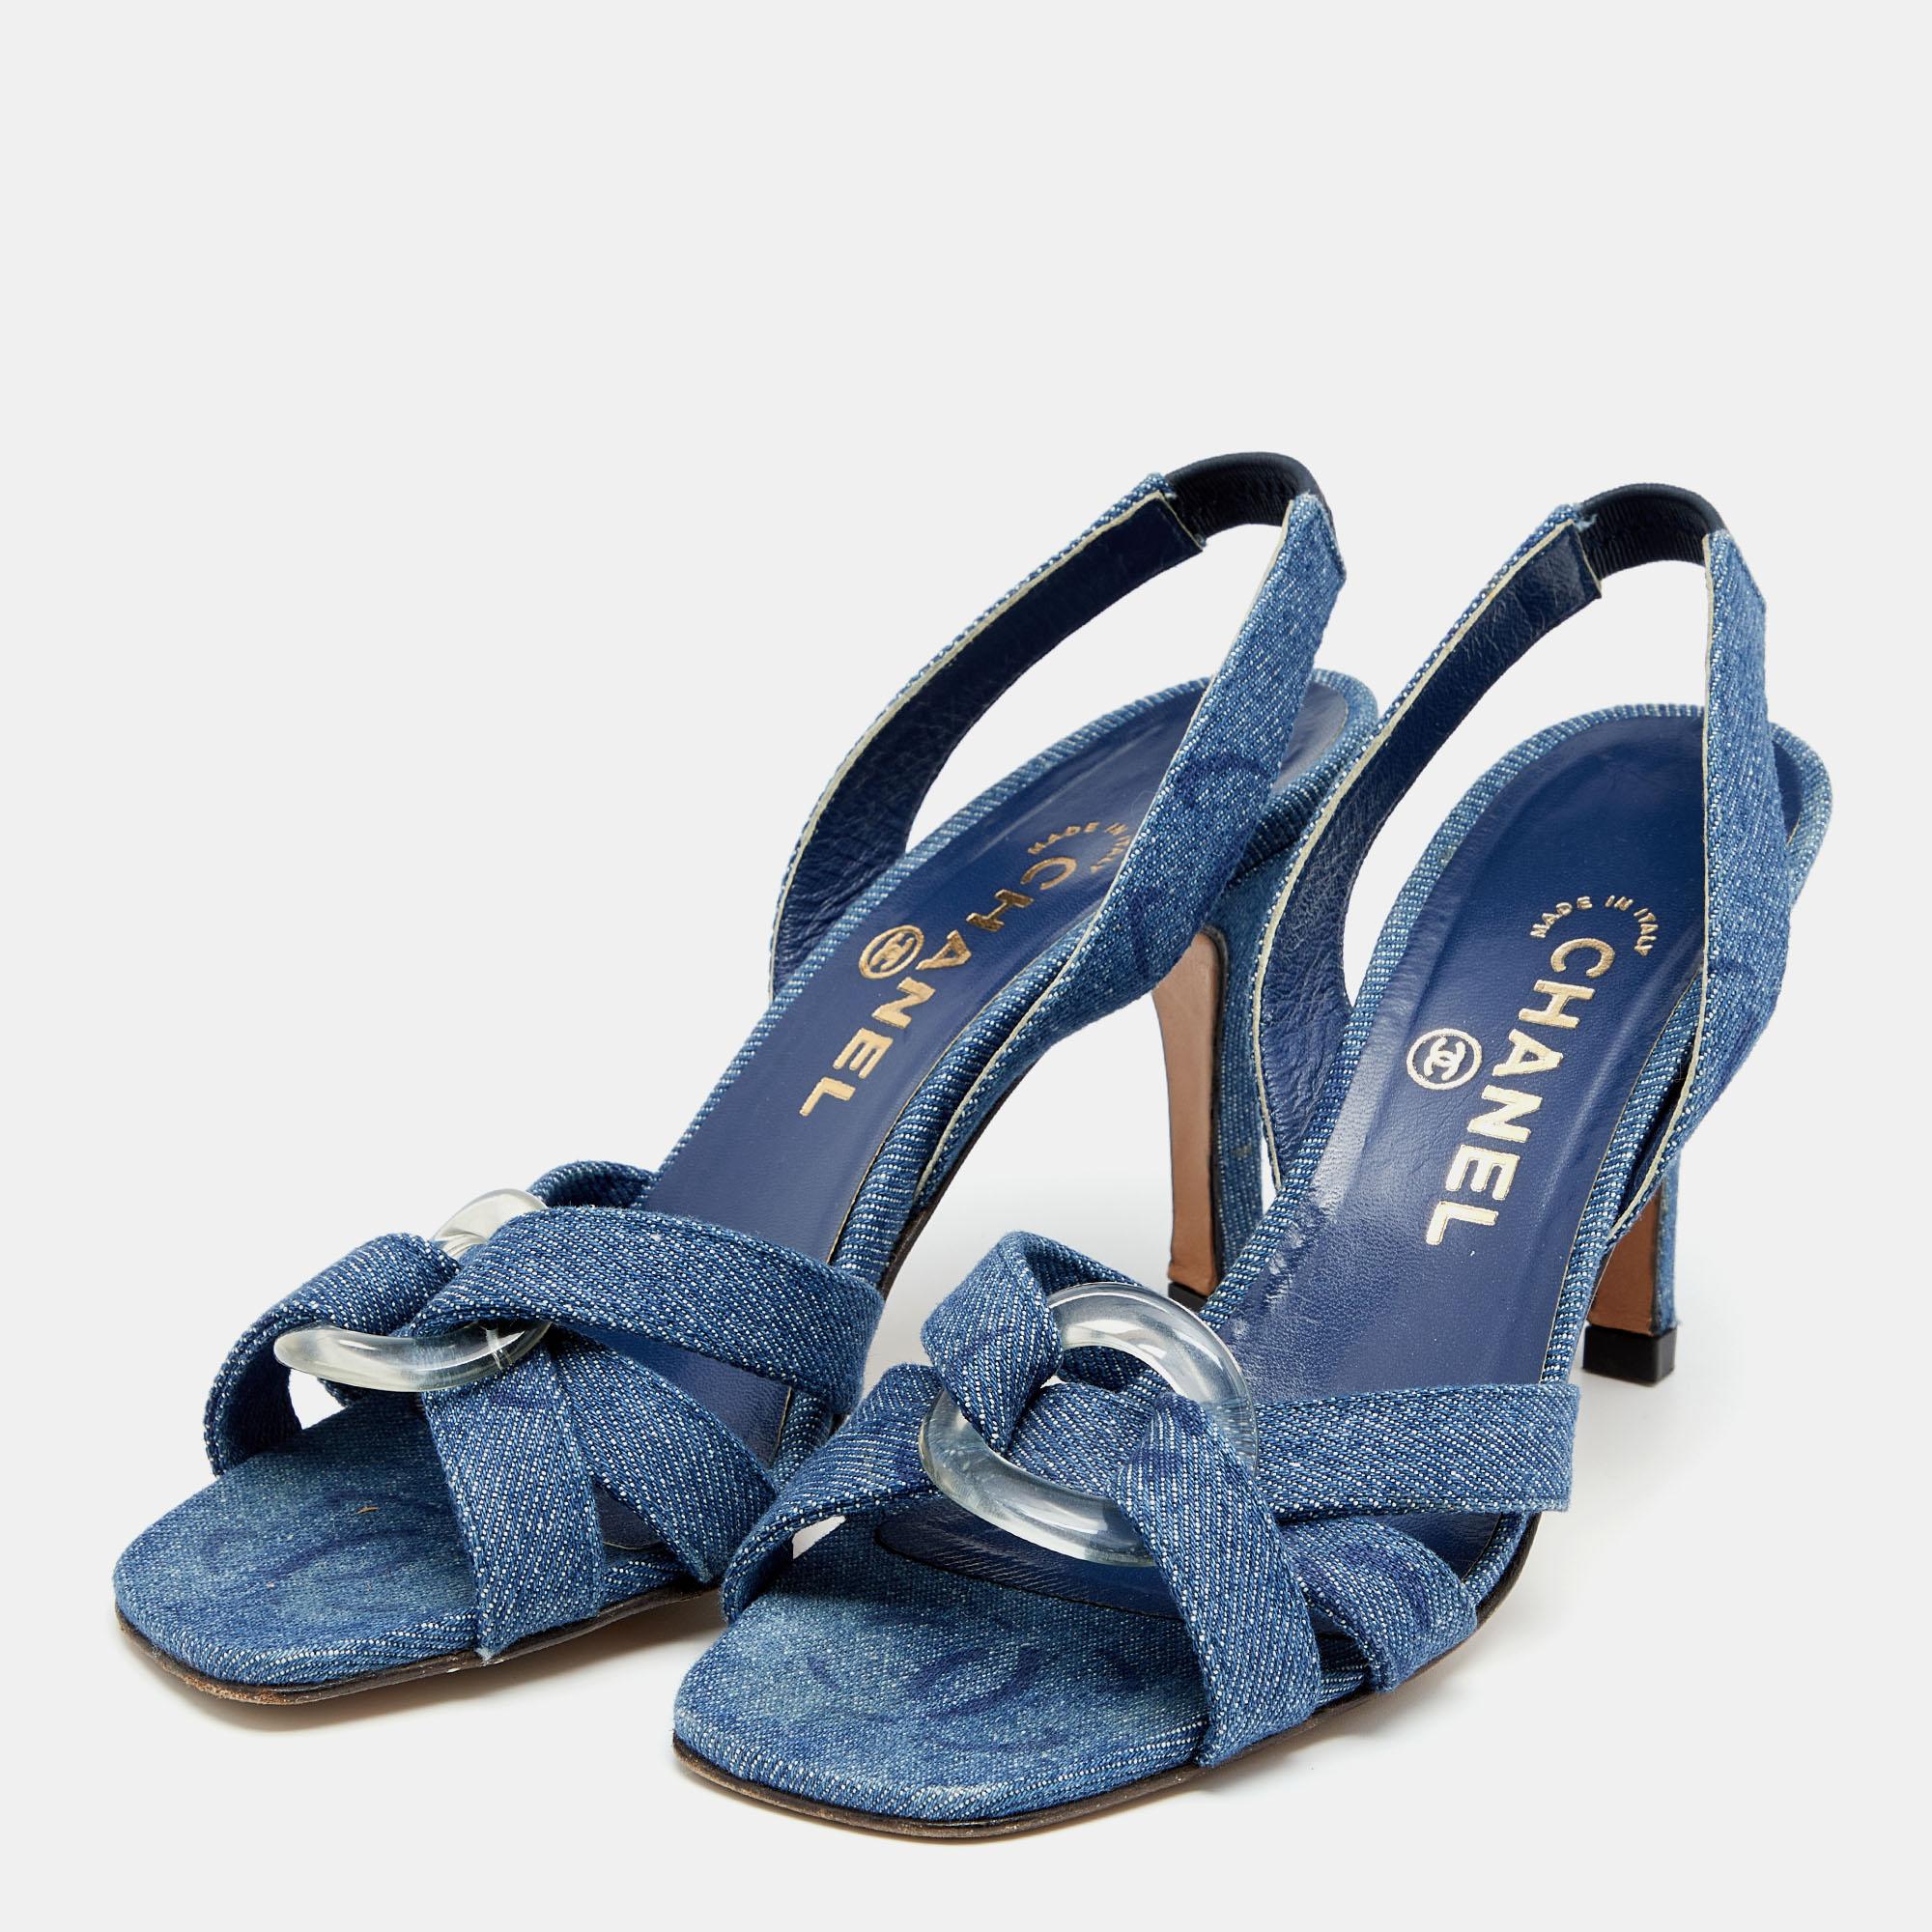 A feminine flair and a sophisticated appeal characterize these stunning Chanel sandals. Crafted using quality materials, they will add an opulent charm to your look and complement many looks that you would want to create.

